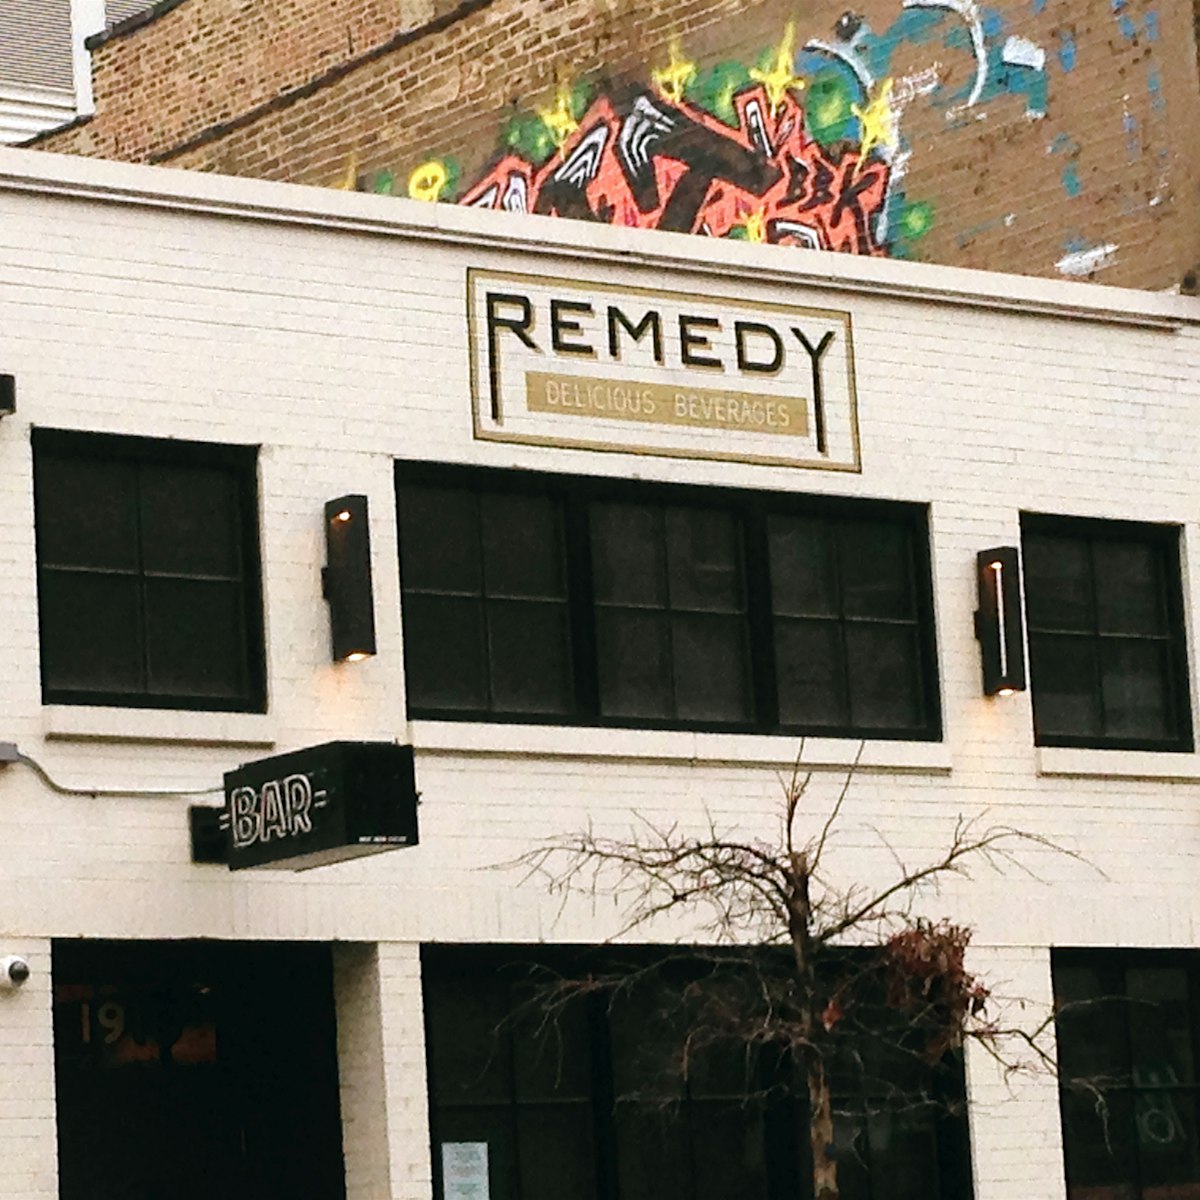 Remedy is a catchall late-night bar in Bucktown.